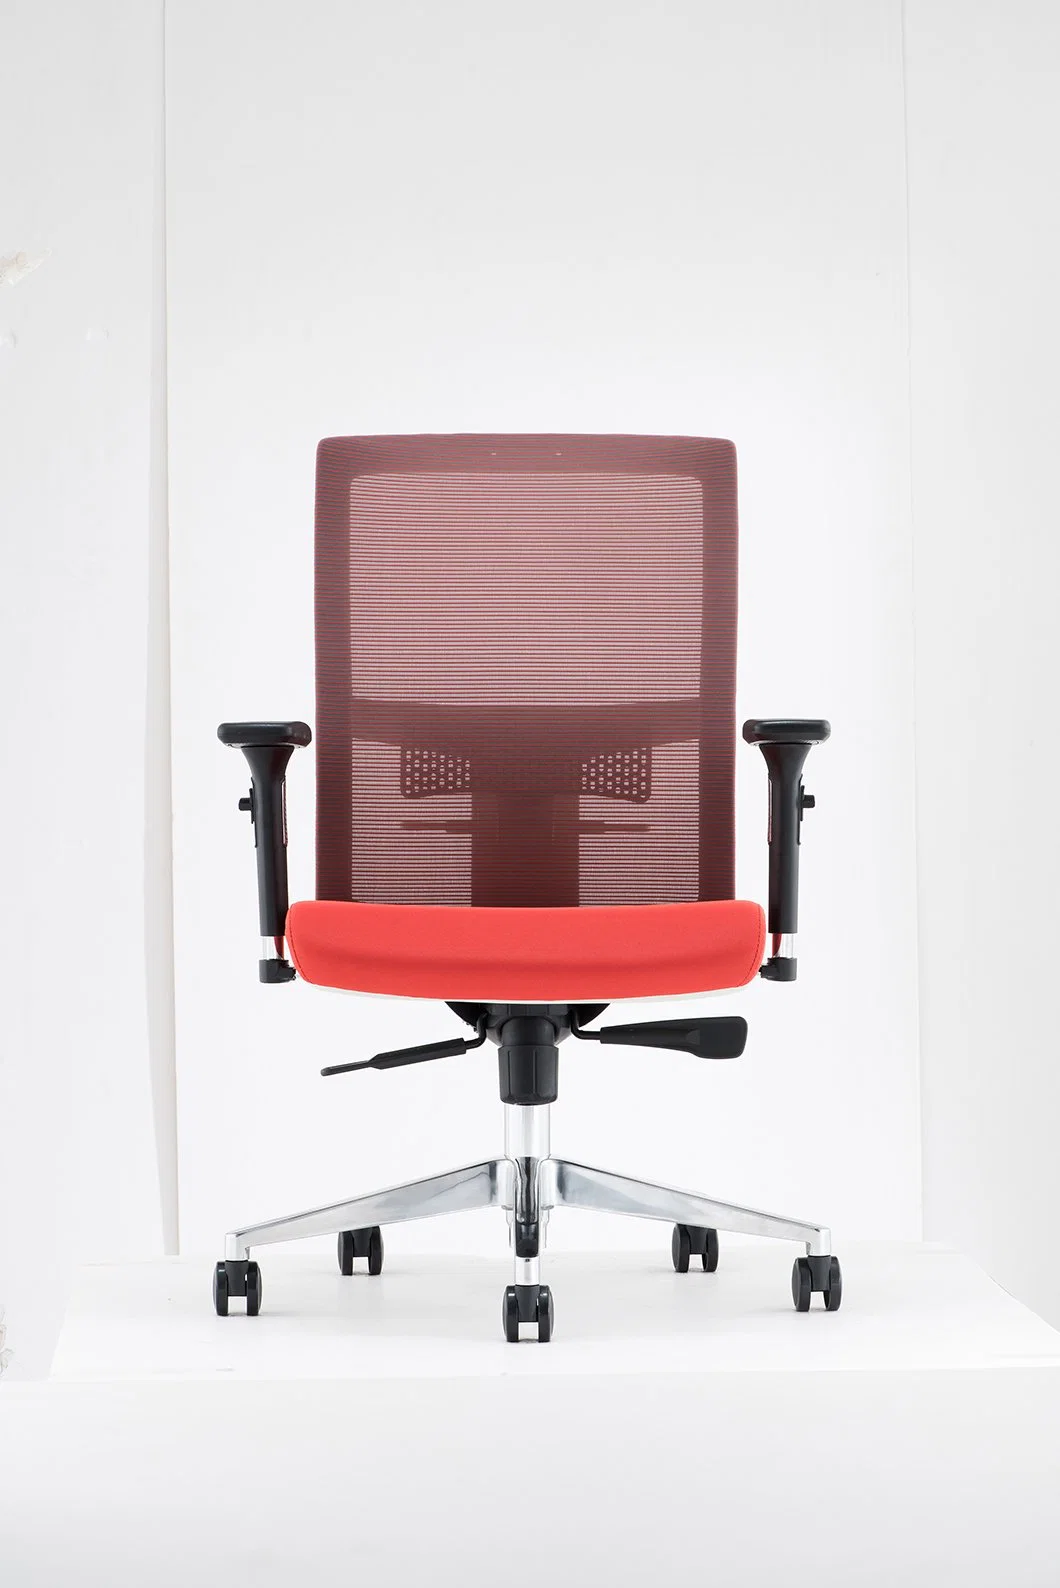 Office Executive Furniture MID-Back Back Swivel Fabric Mesh Office Chair Swivel with Wheels